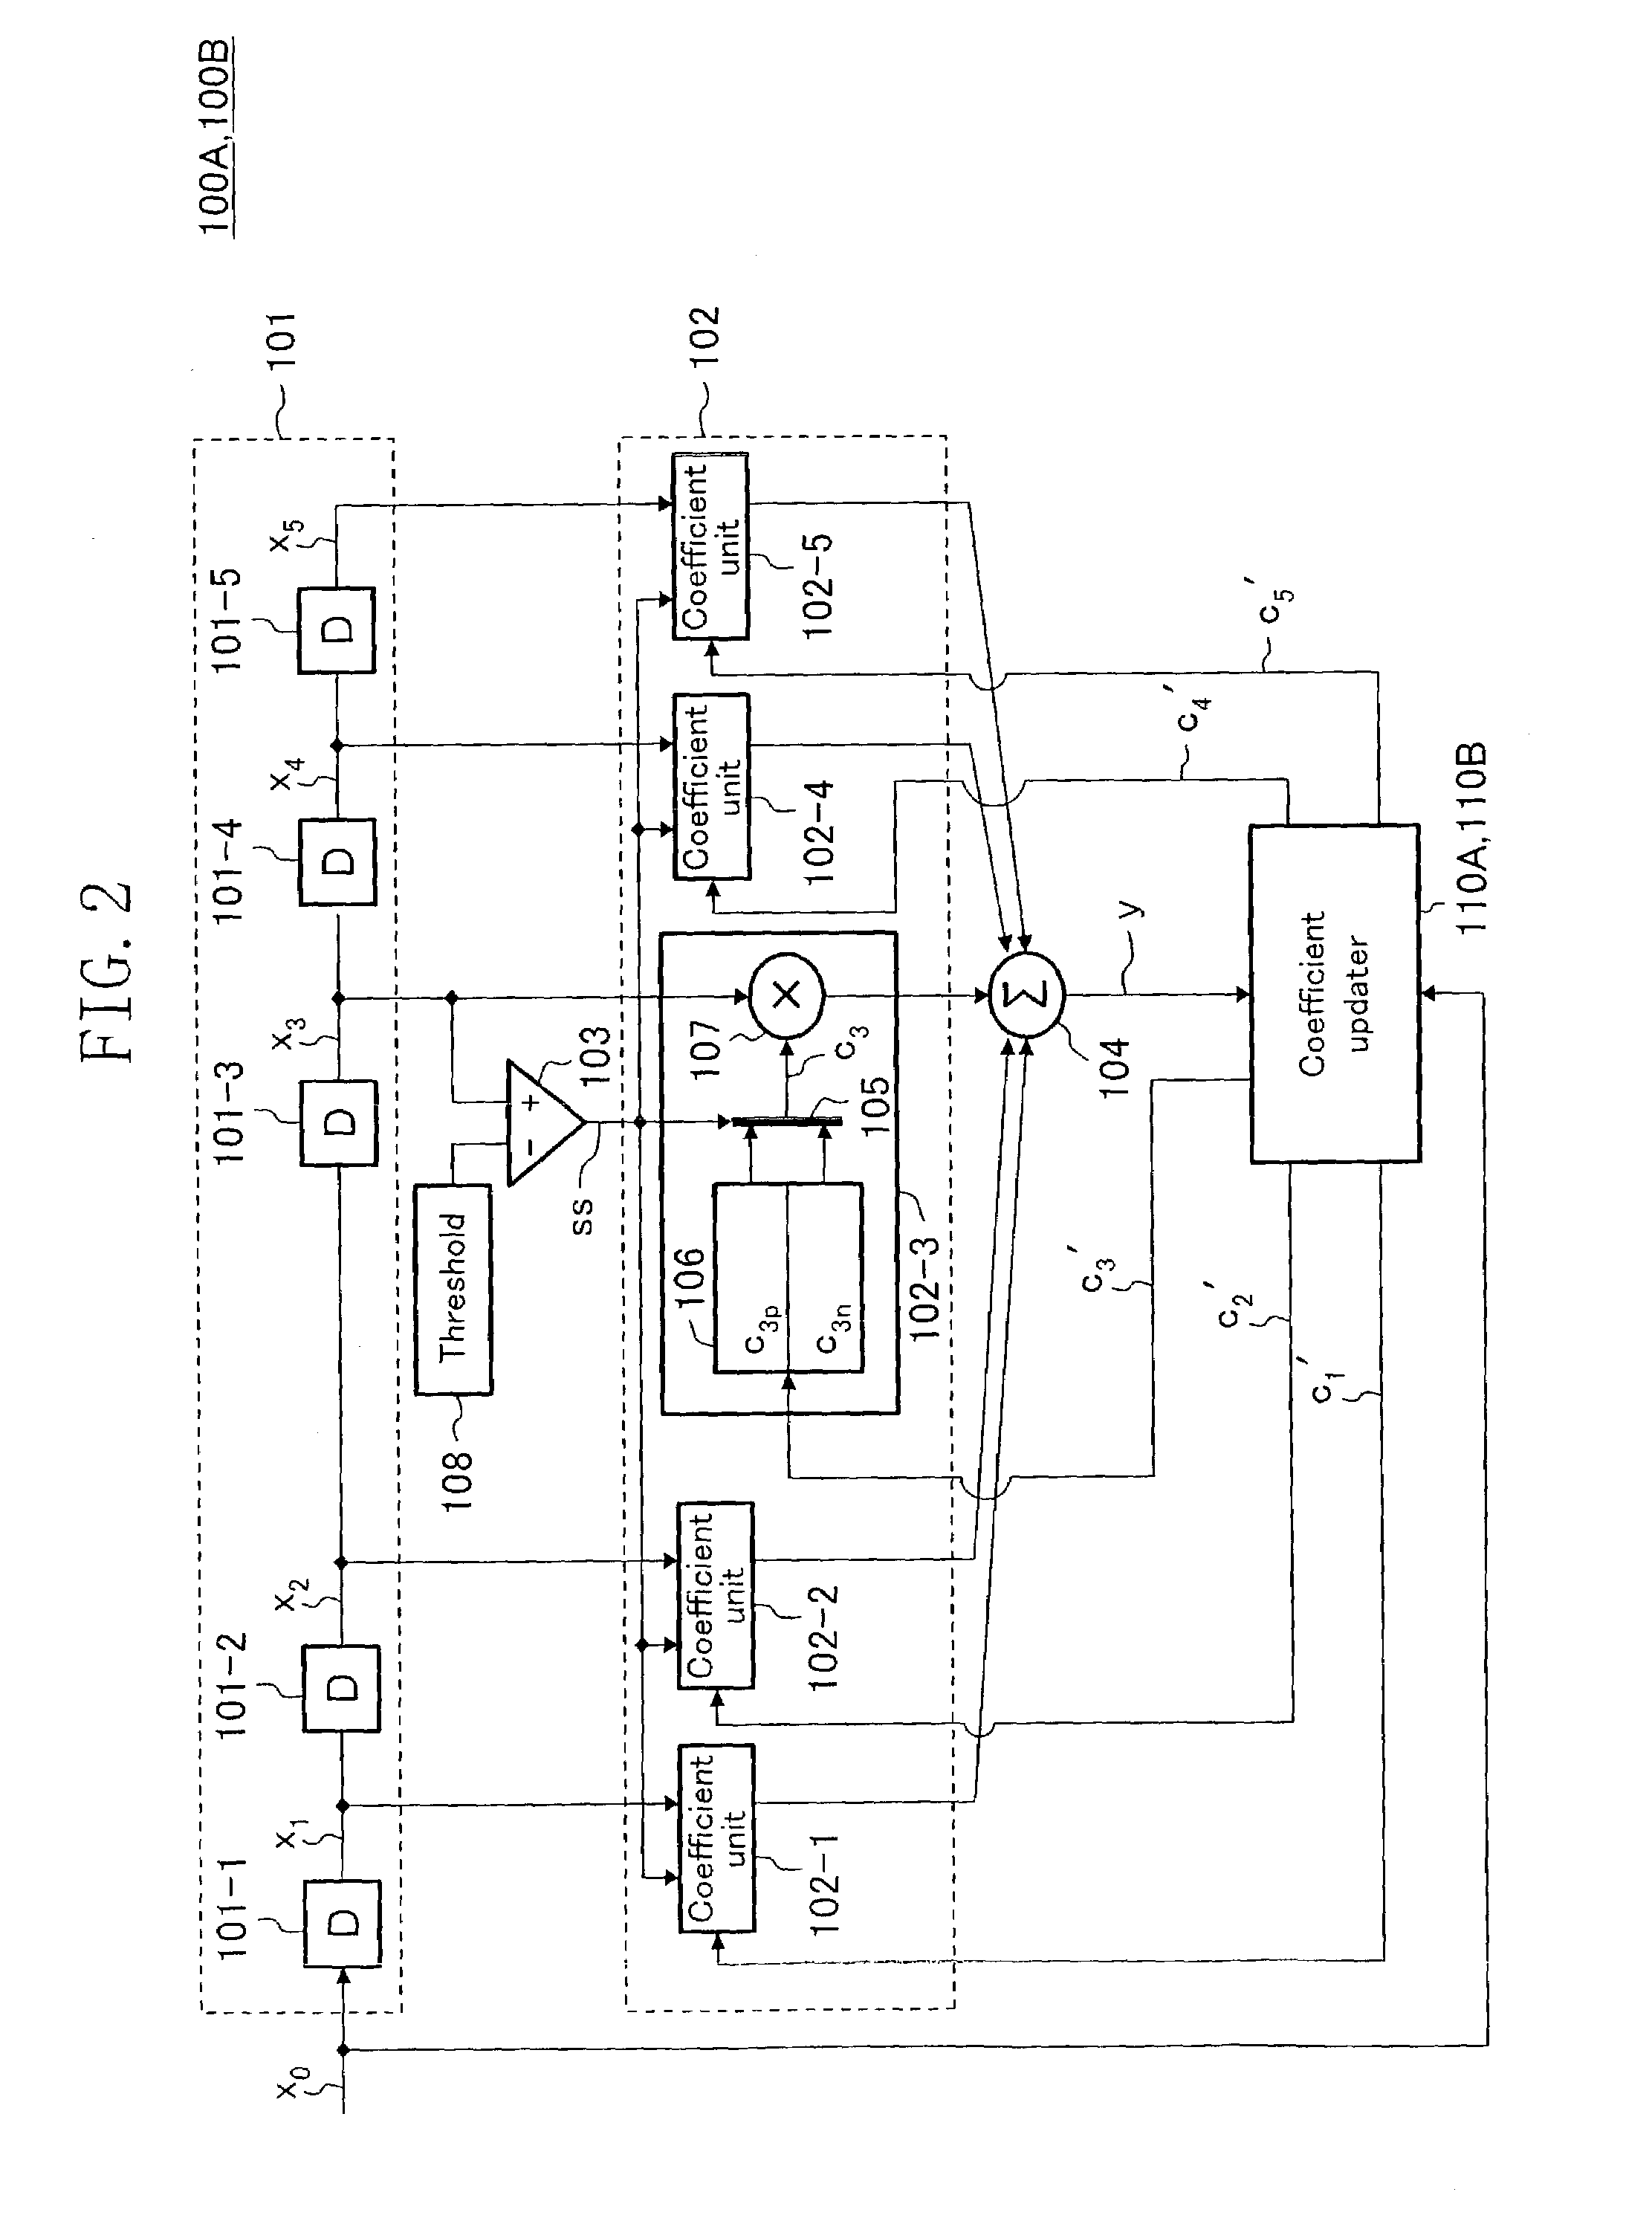 Equalizer and reproduction signal processing device